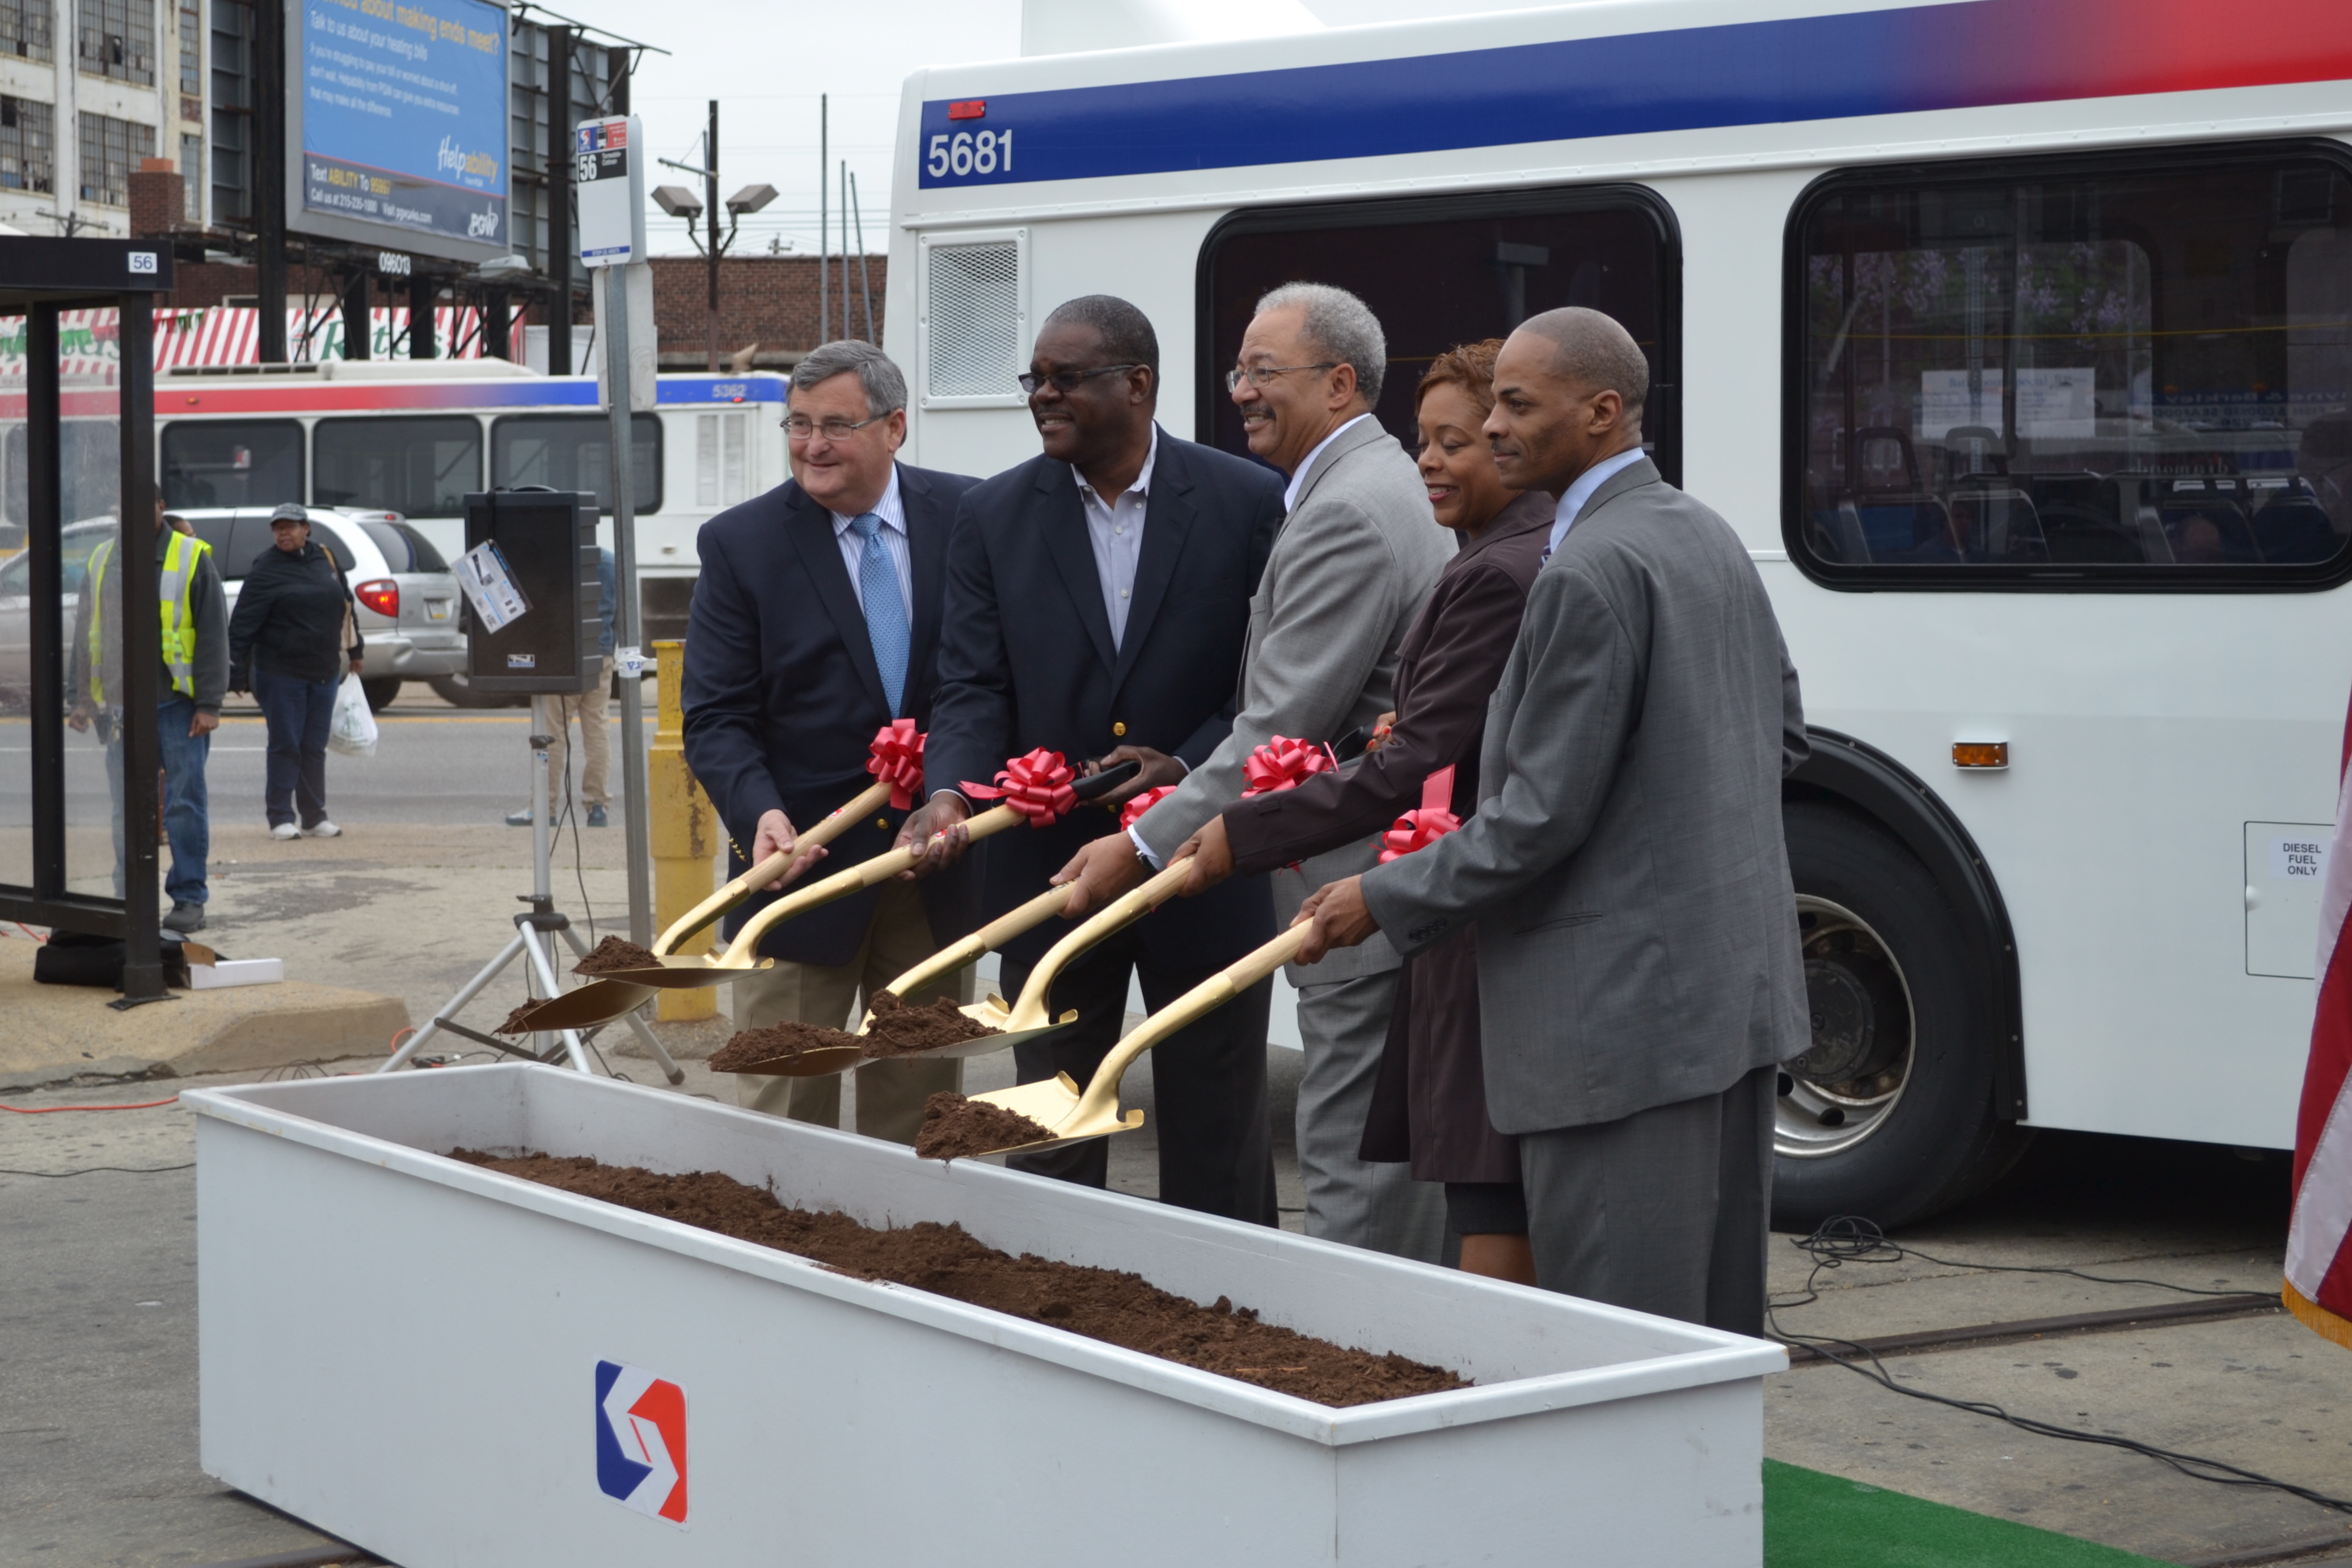 Fattah (middle) posed with SEPTA, neighborhood and city representatives for the ceremonial ground breaking